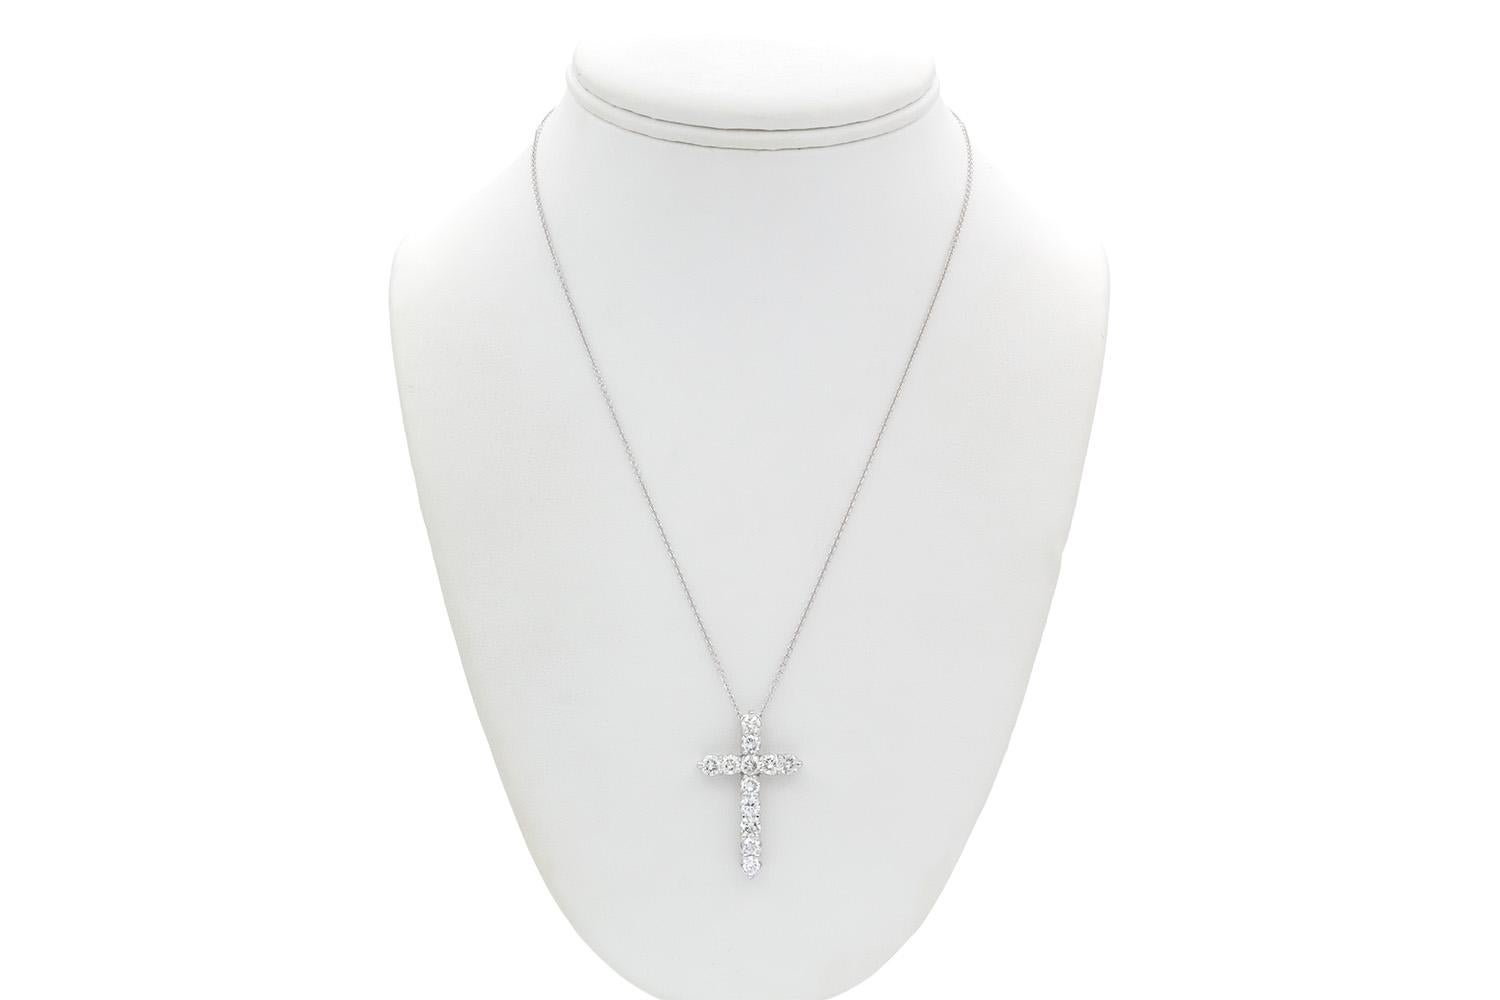 We are pleased to present this 14k White Gold & Diamond Cross Crucifix Pendant Necklace. This stunning piece features 2.50ctw H-J/VS2-SI1 round brilliant cut diamonds set in a 14k white gold cross pendant on a 14k white gold chain which is